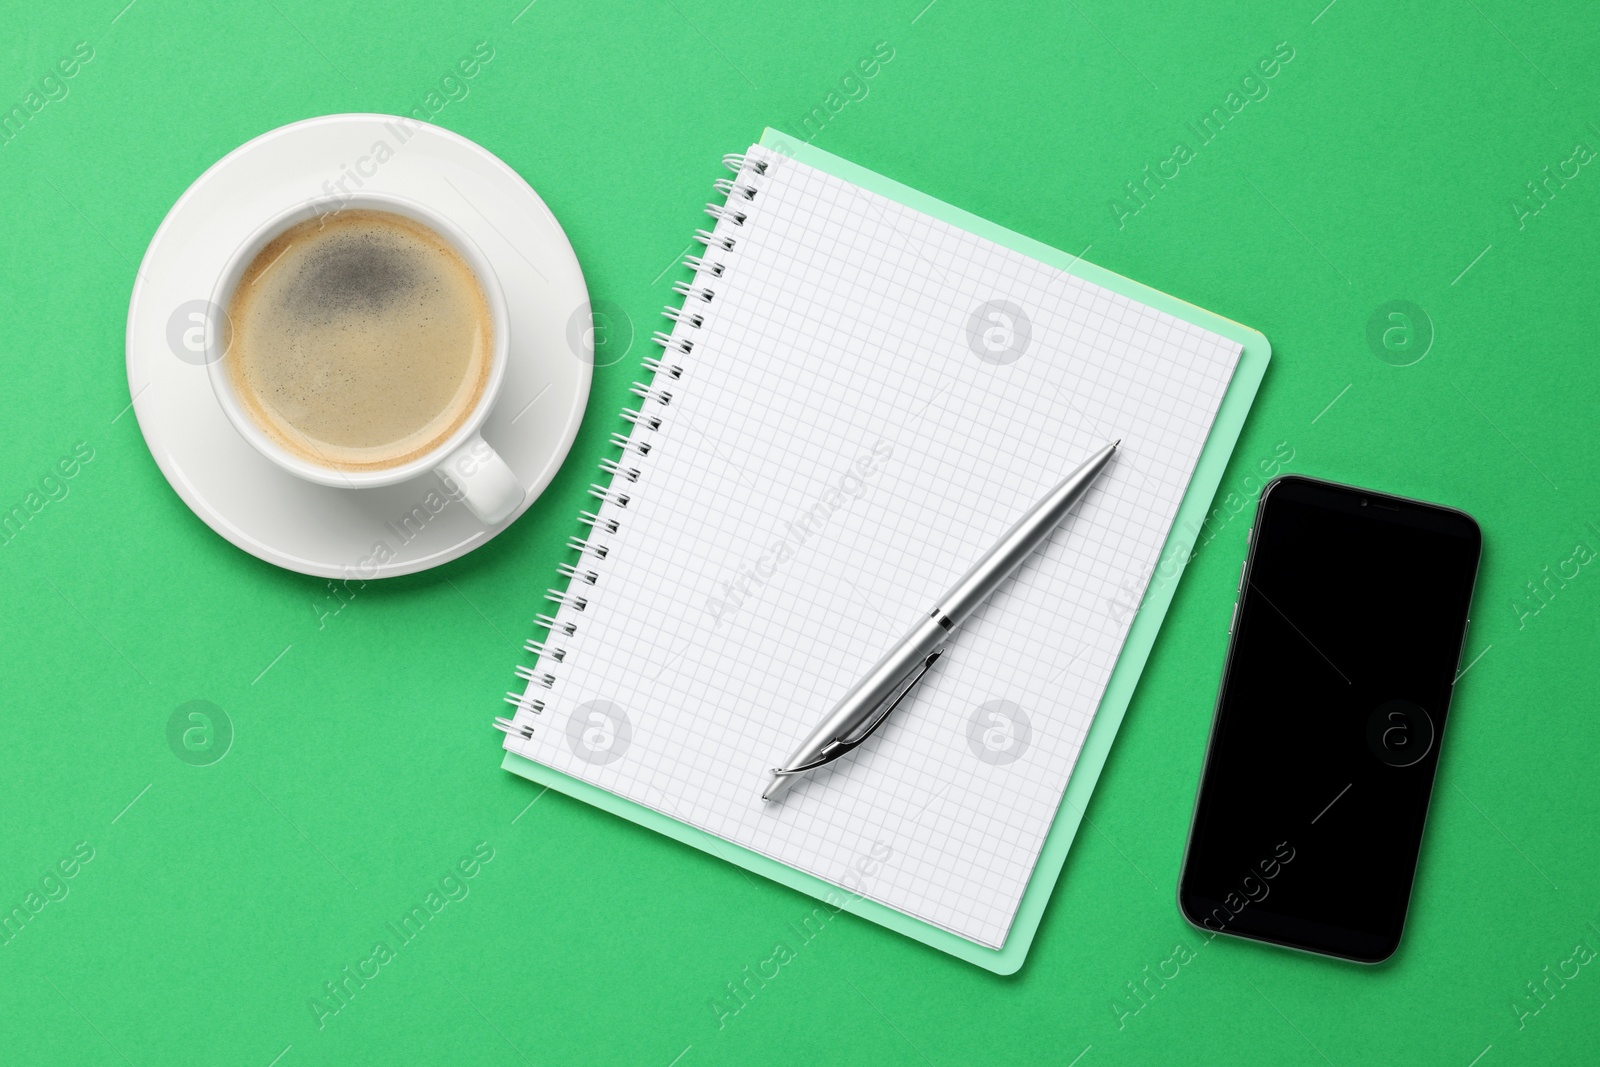 Photo of Ballpoint pen, notebook and smartphone on green background, flat lay